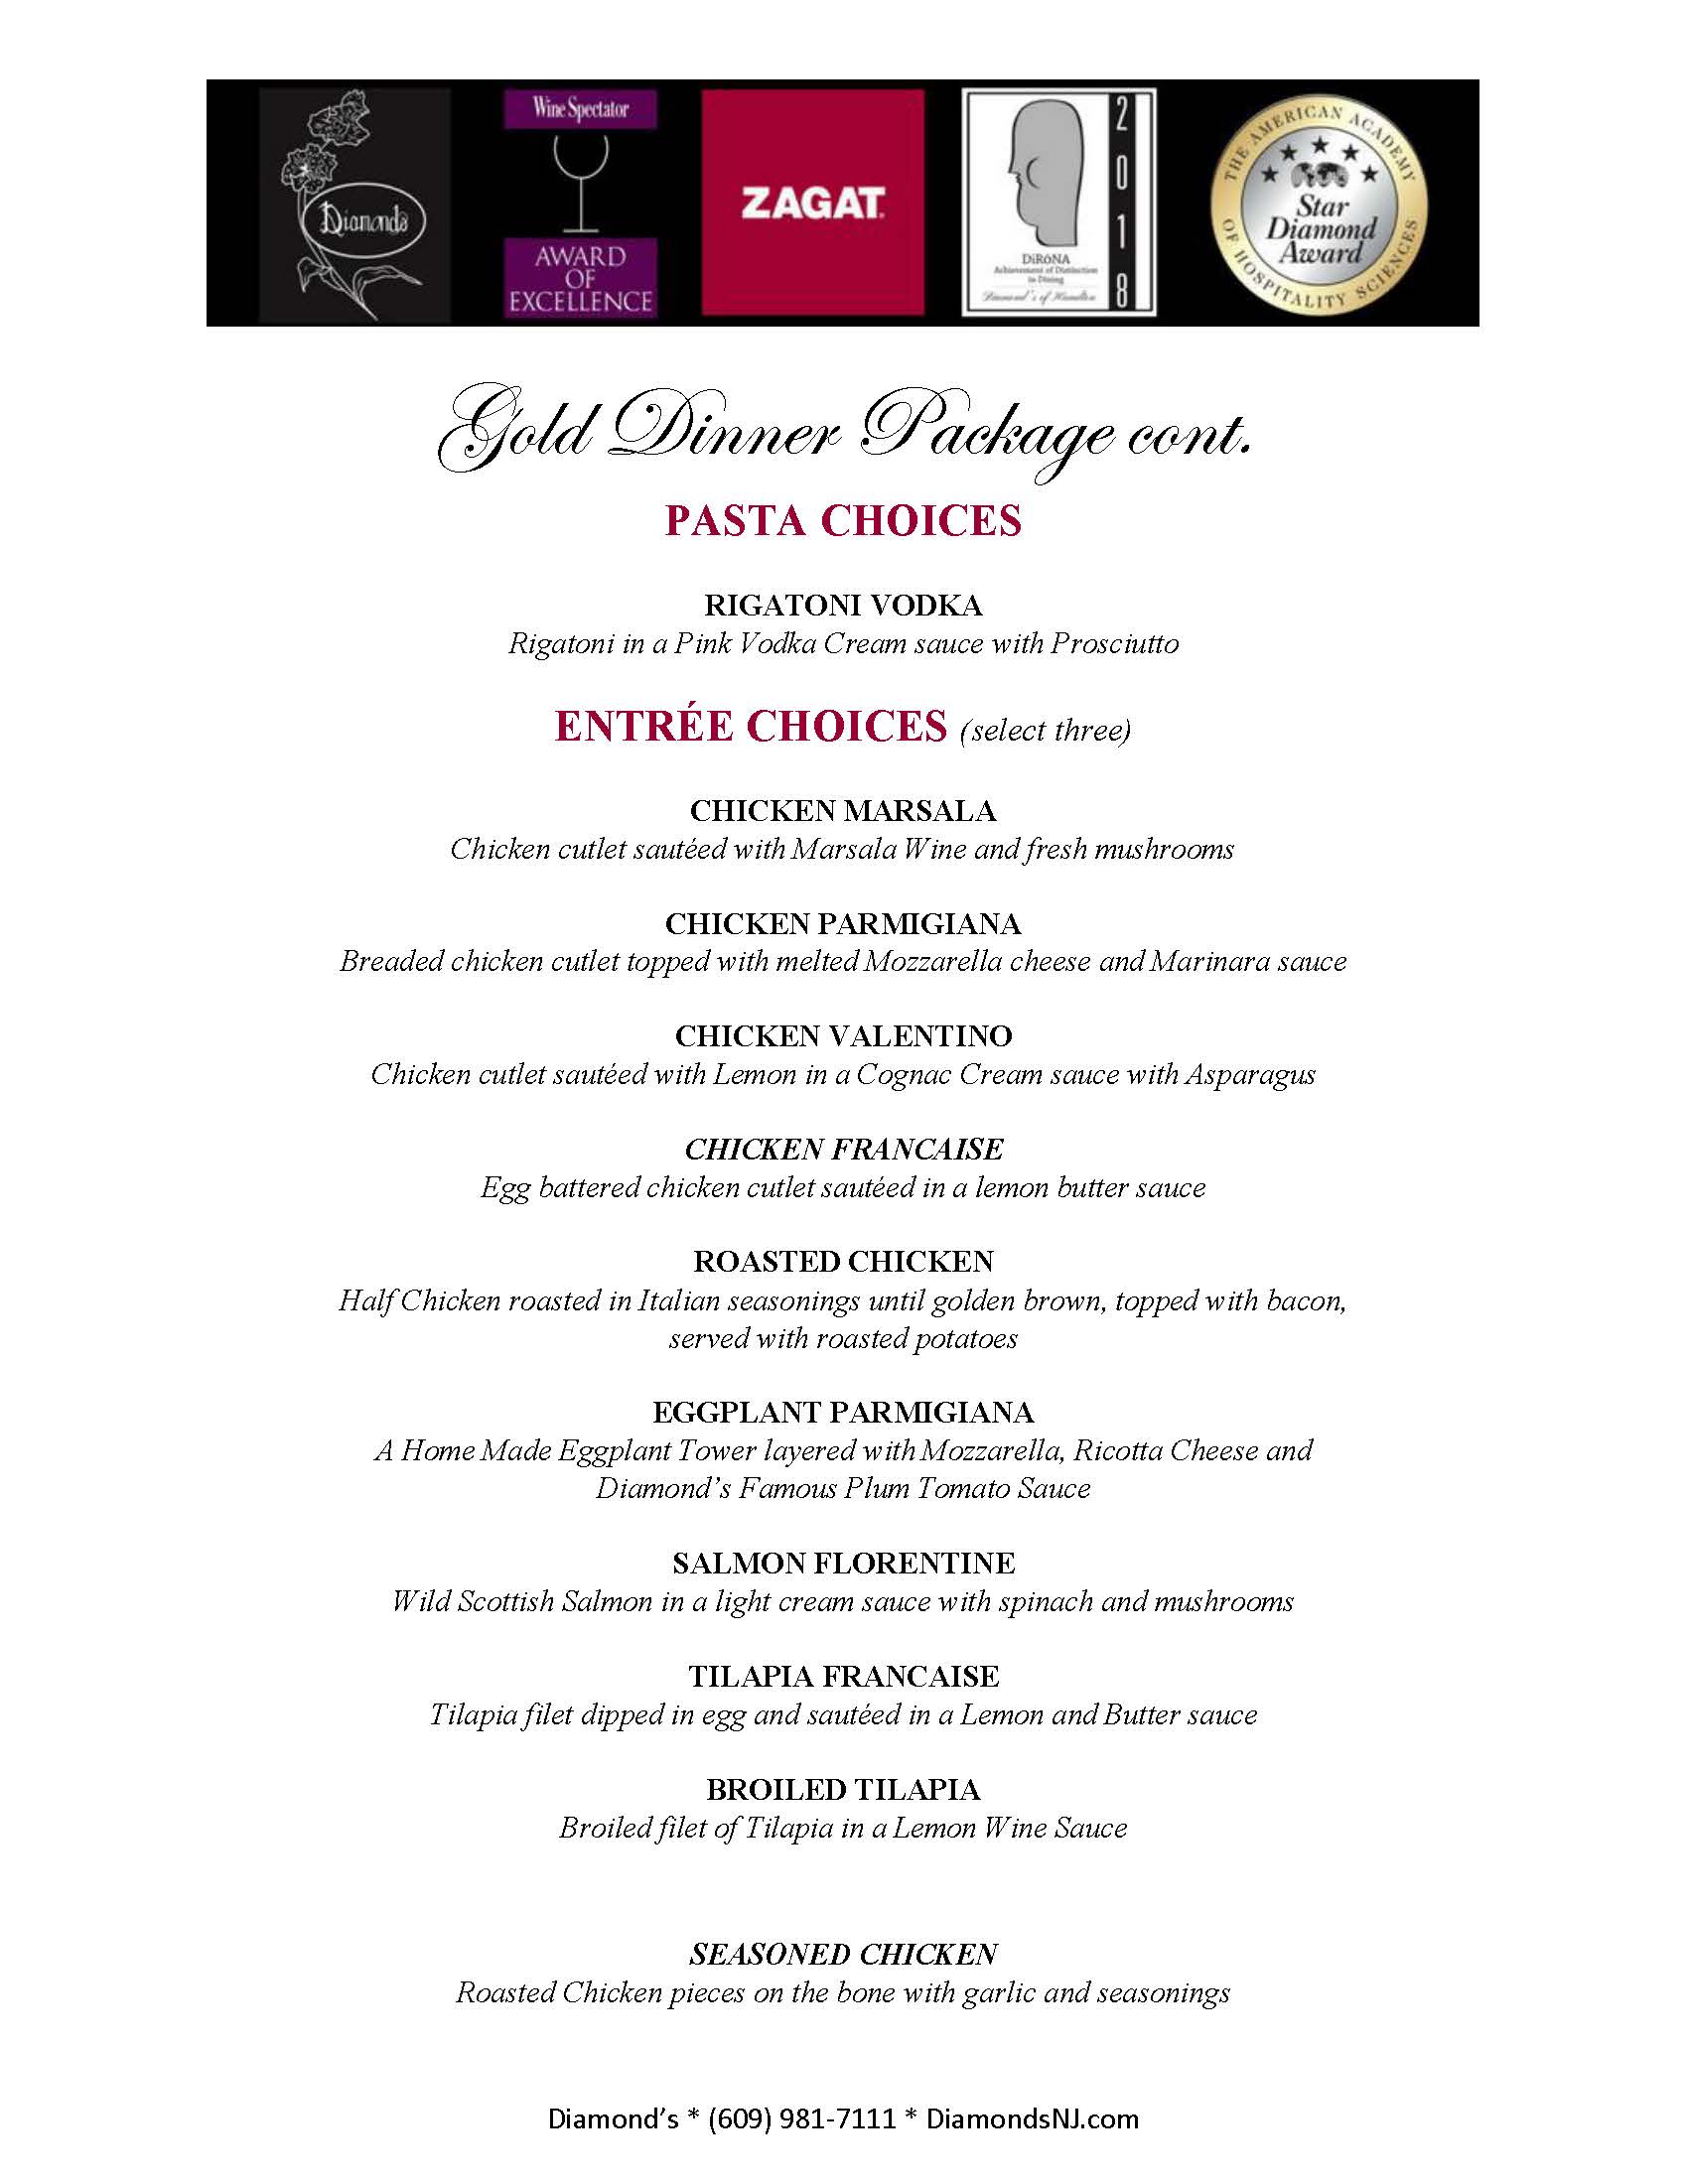 The menu for the gold dinner package event.